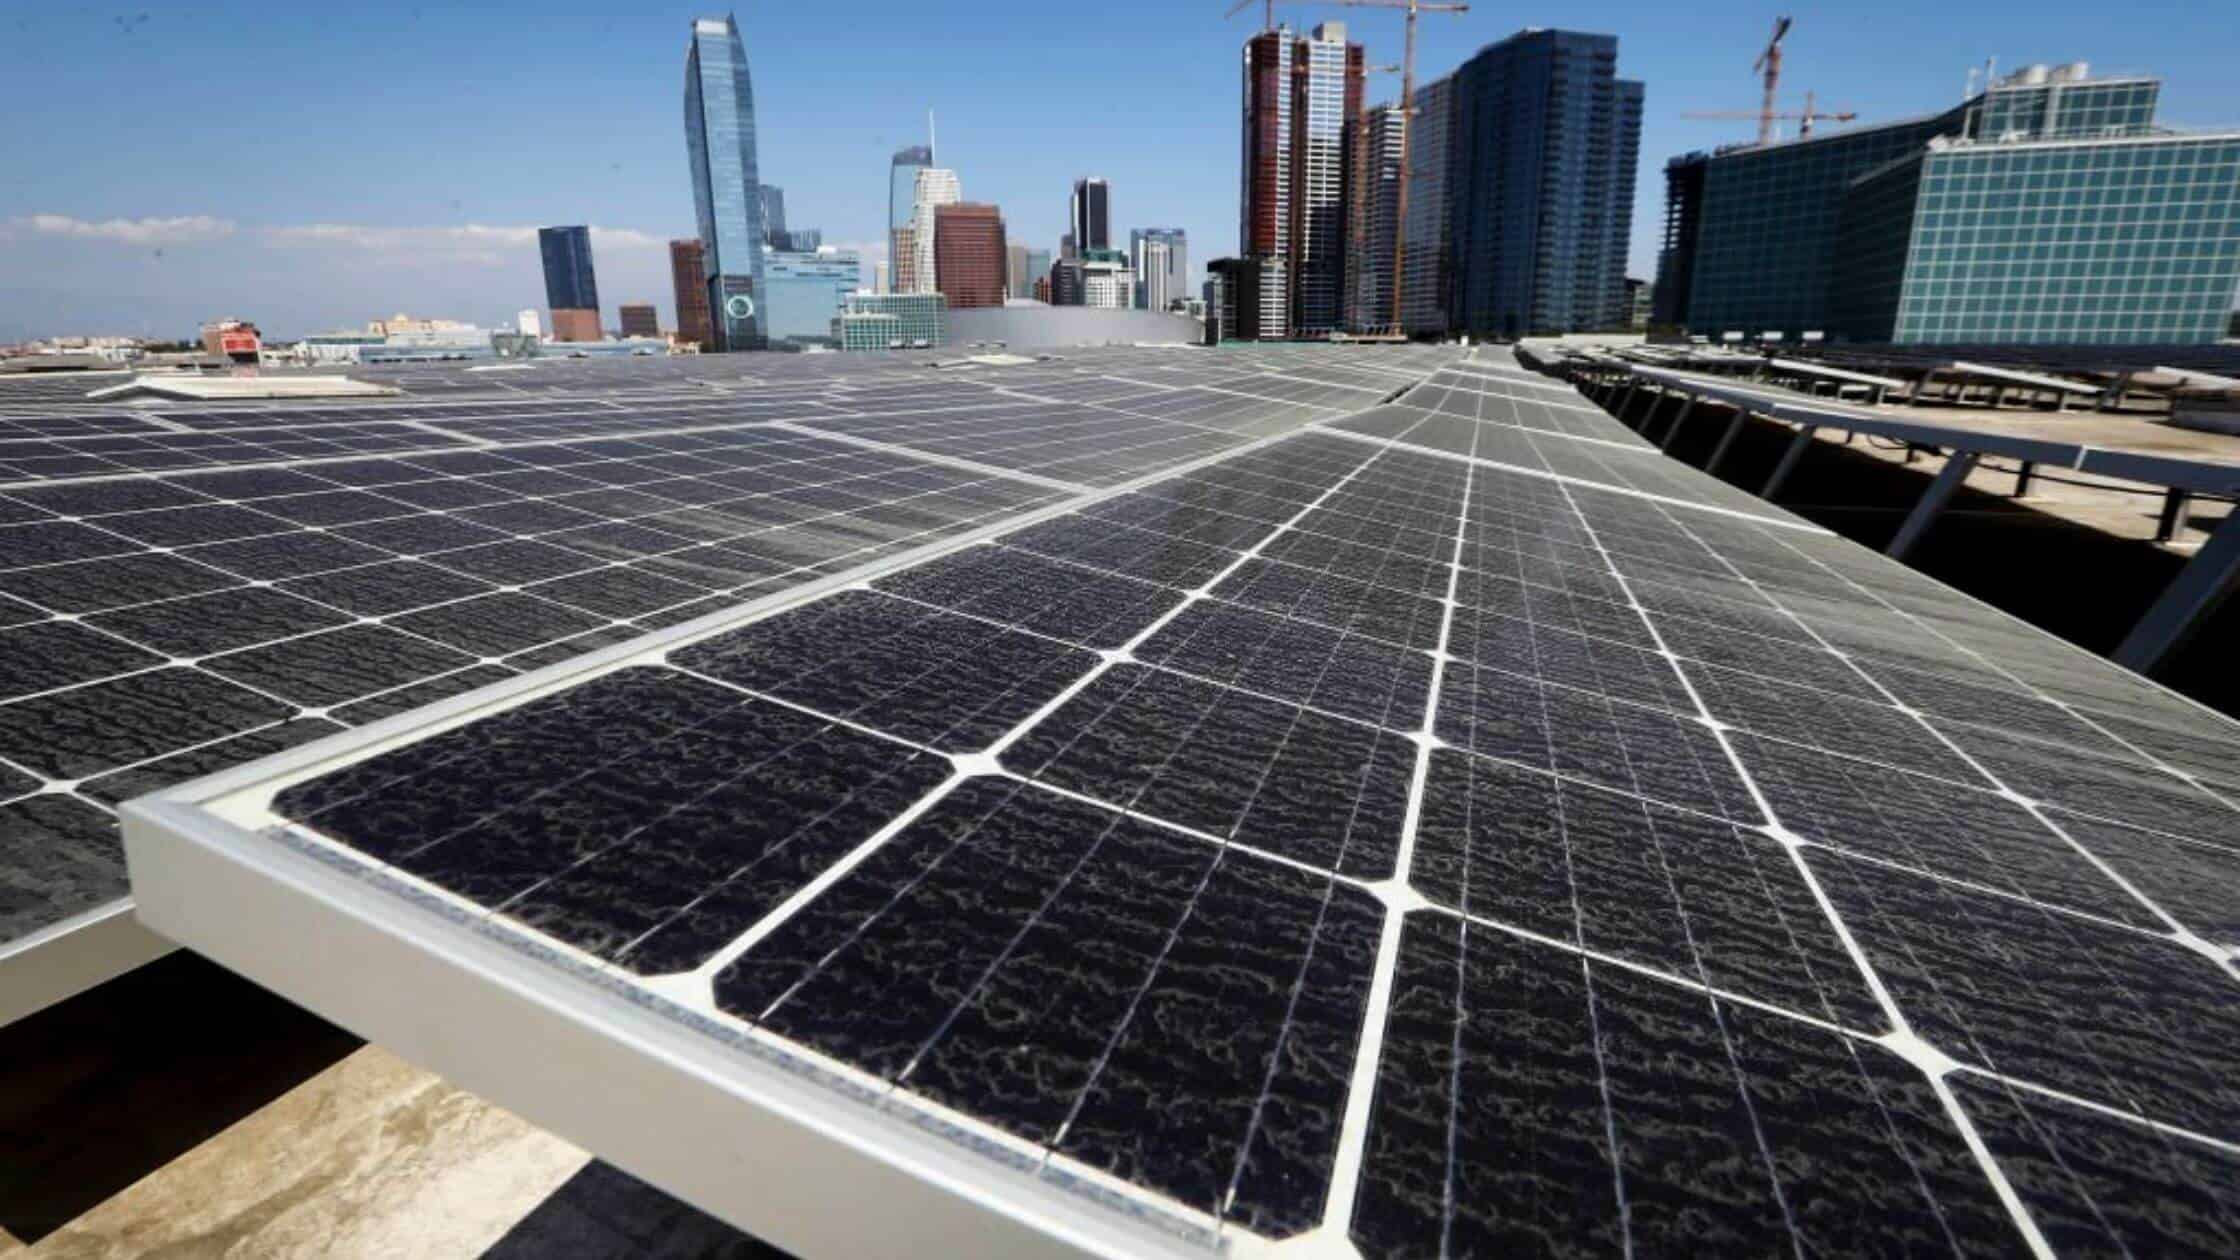 Bad News Hit California Residents As The State Reduces Subsidies For Homes With Rooftop Solar